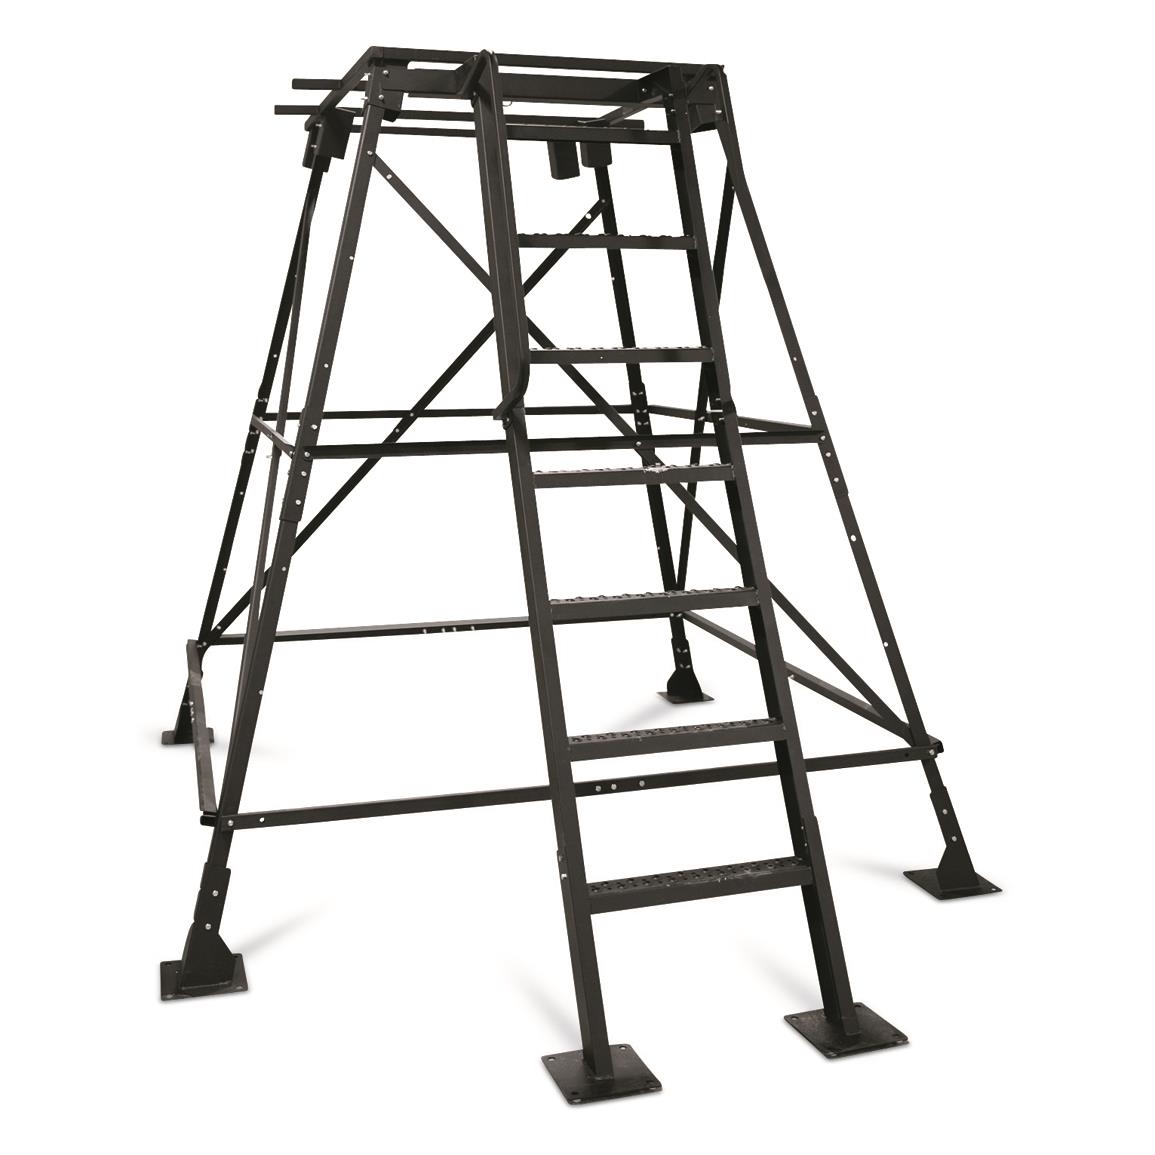 Banks Outdoors Steel Tower System